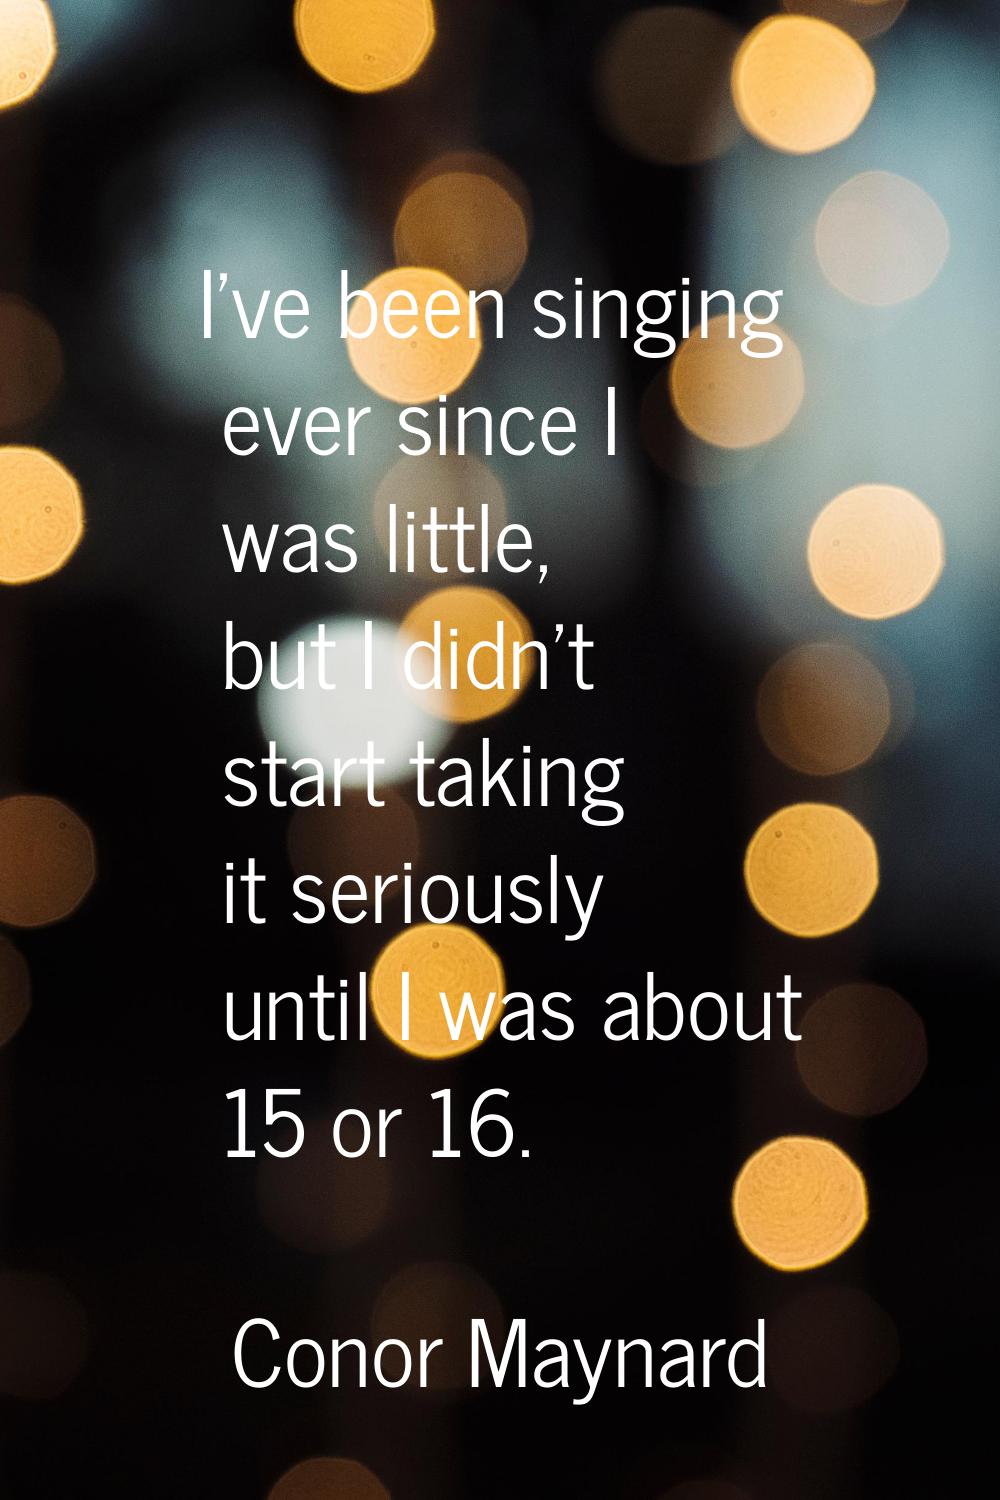 I've been singing ever since I was little, but I didn't start taking it seriously until I was about